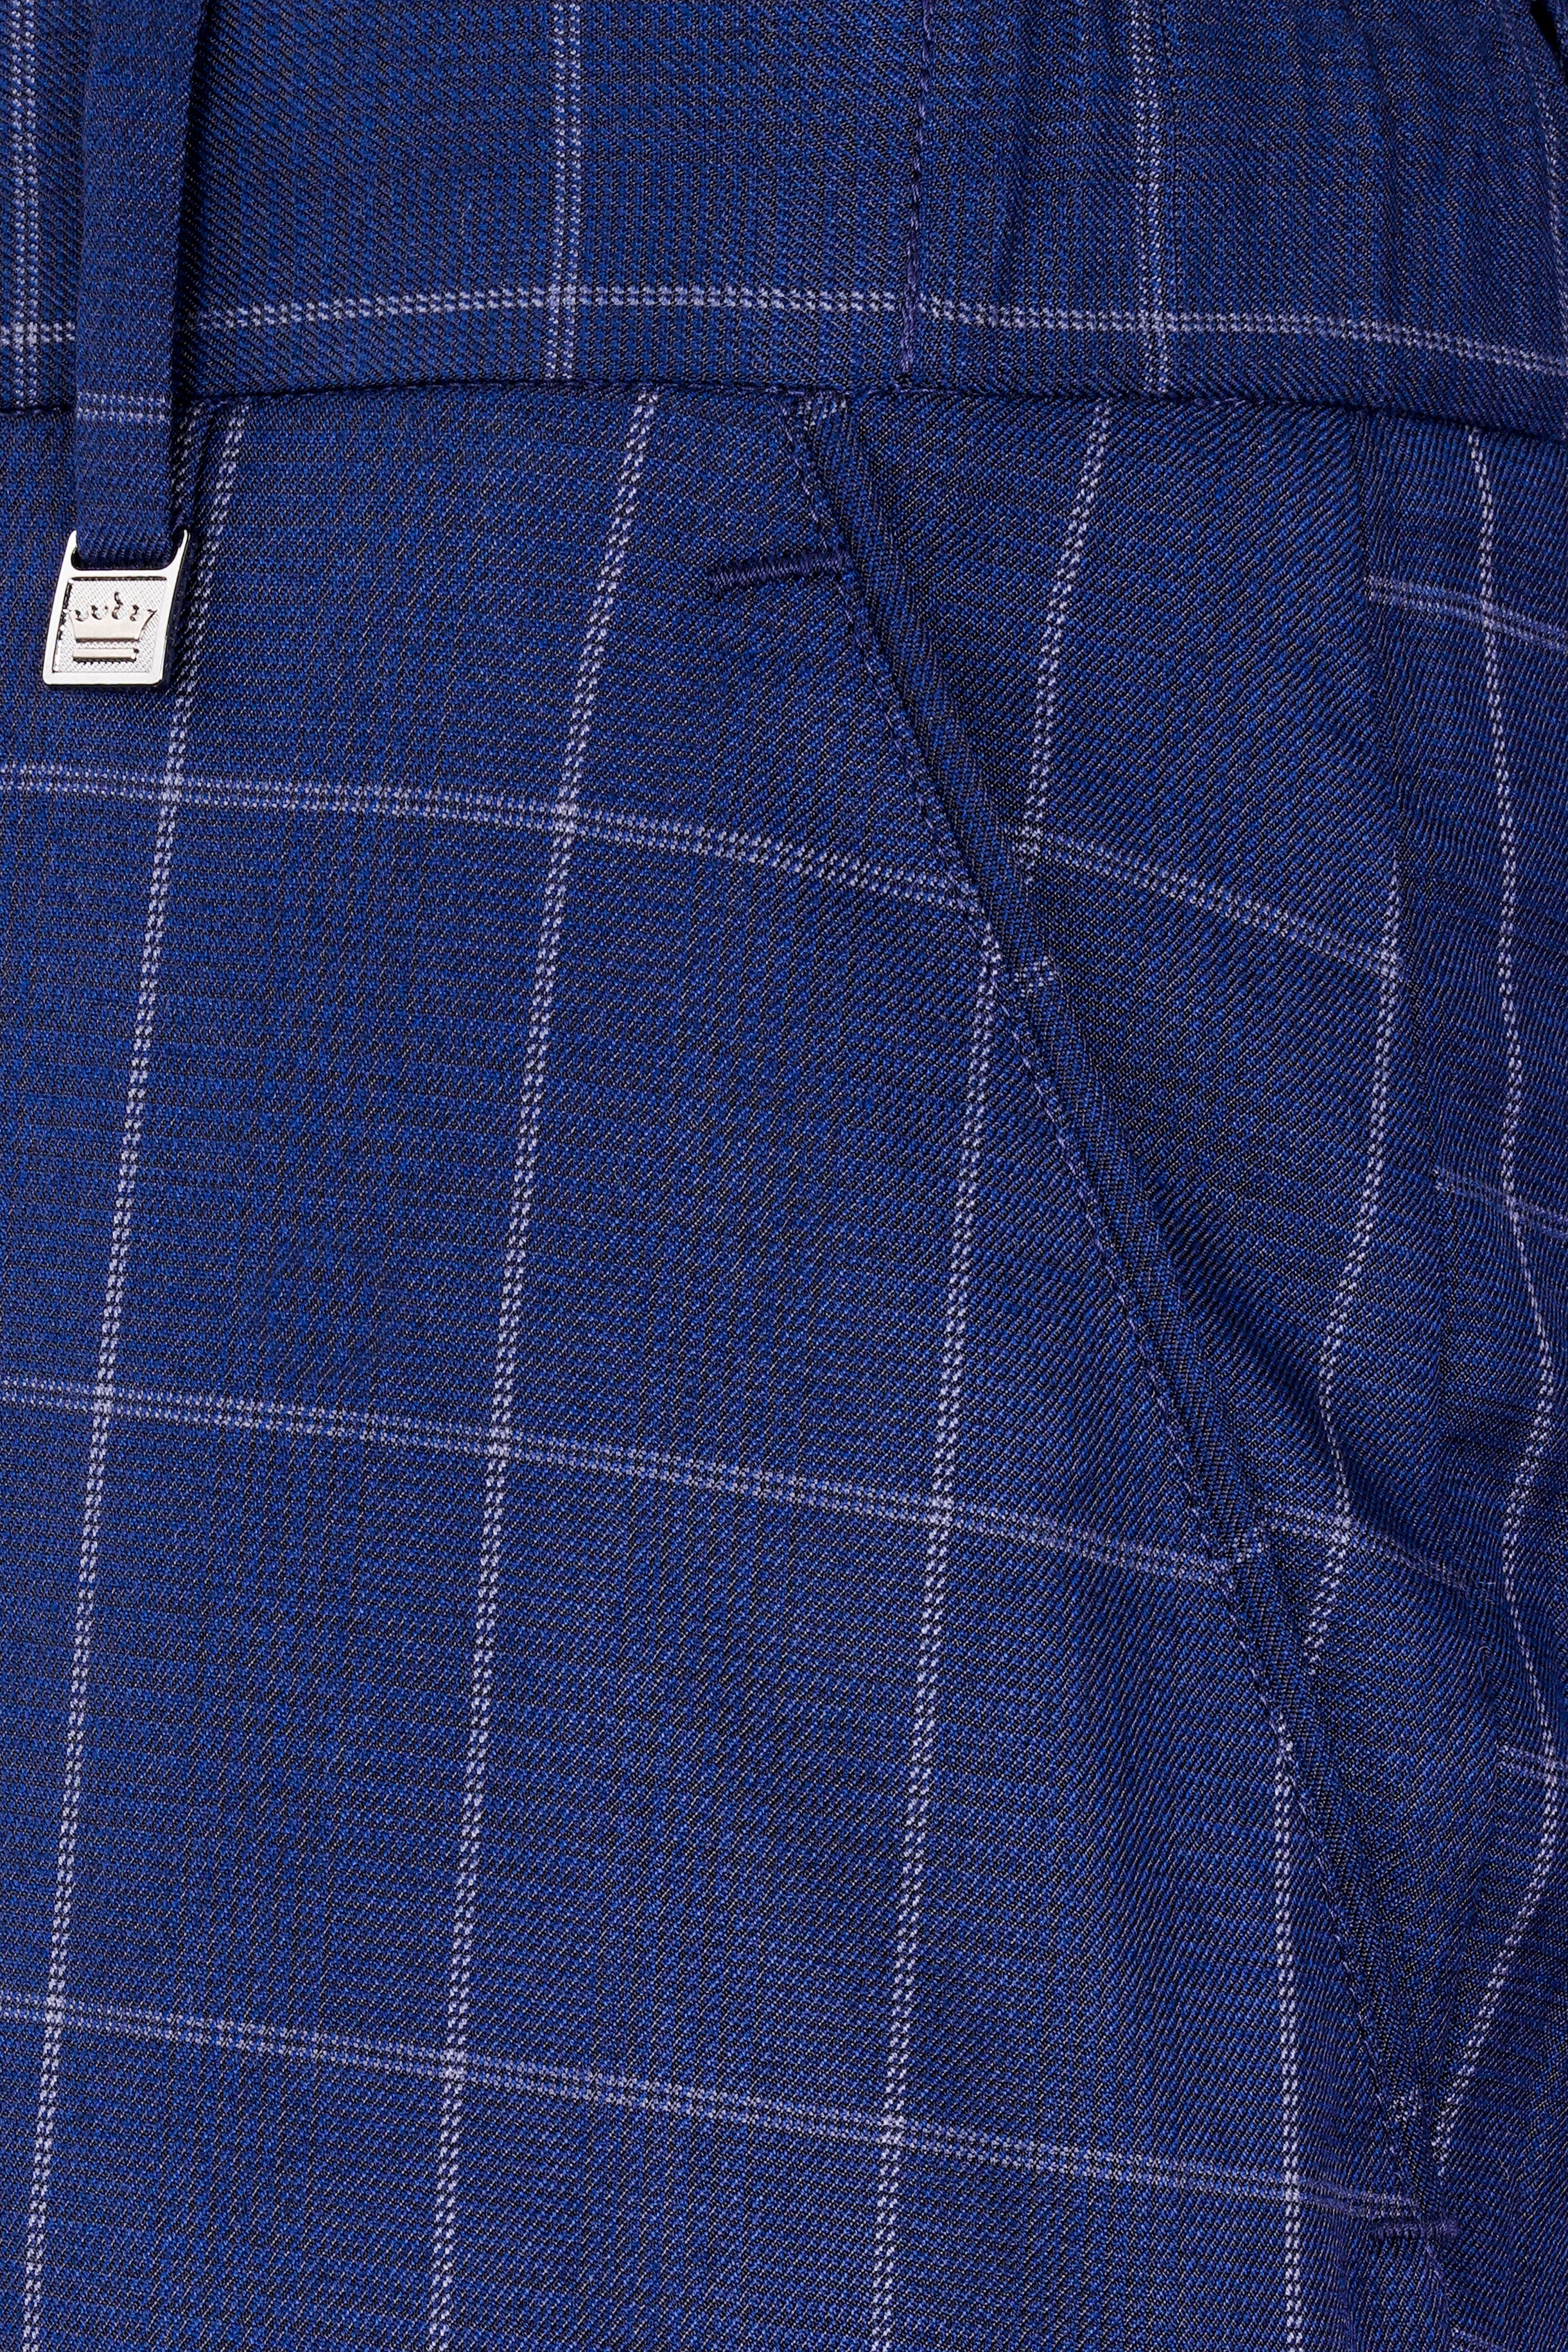 Rhino Blue Windowpane Wool Rich Double Breasted Suit